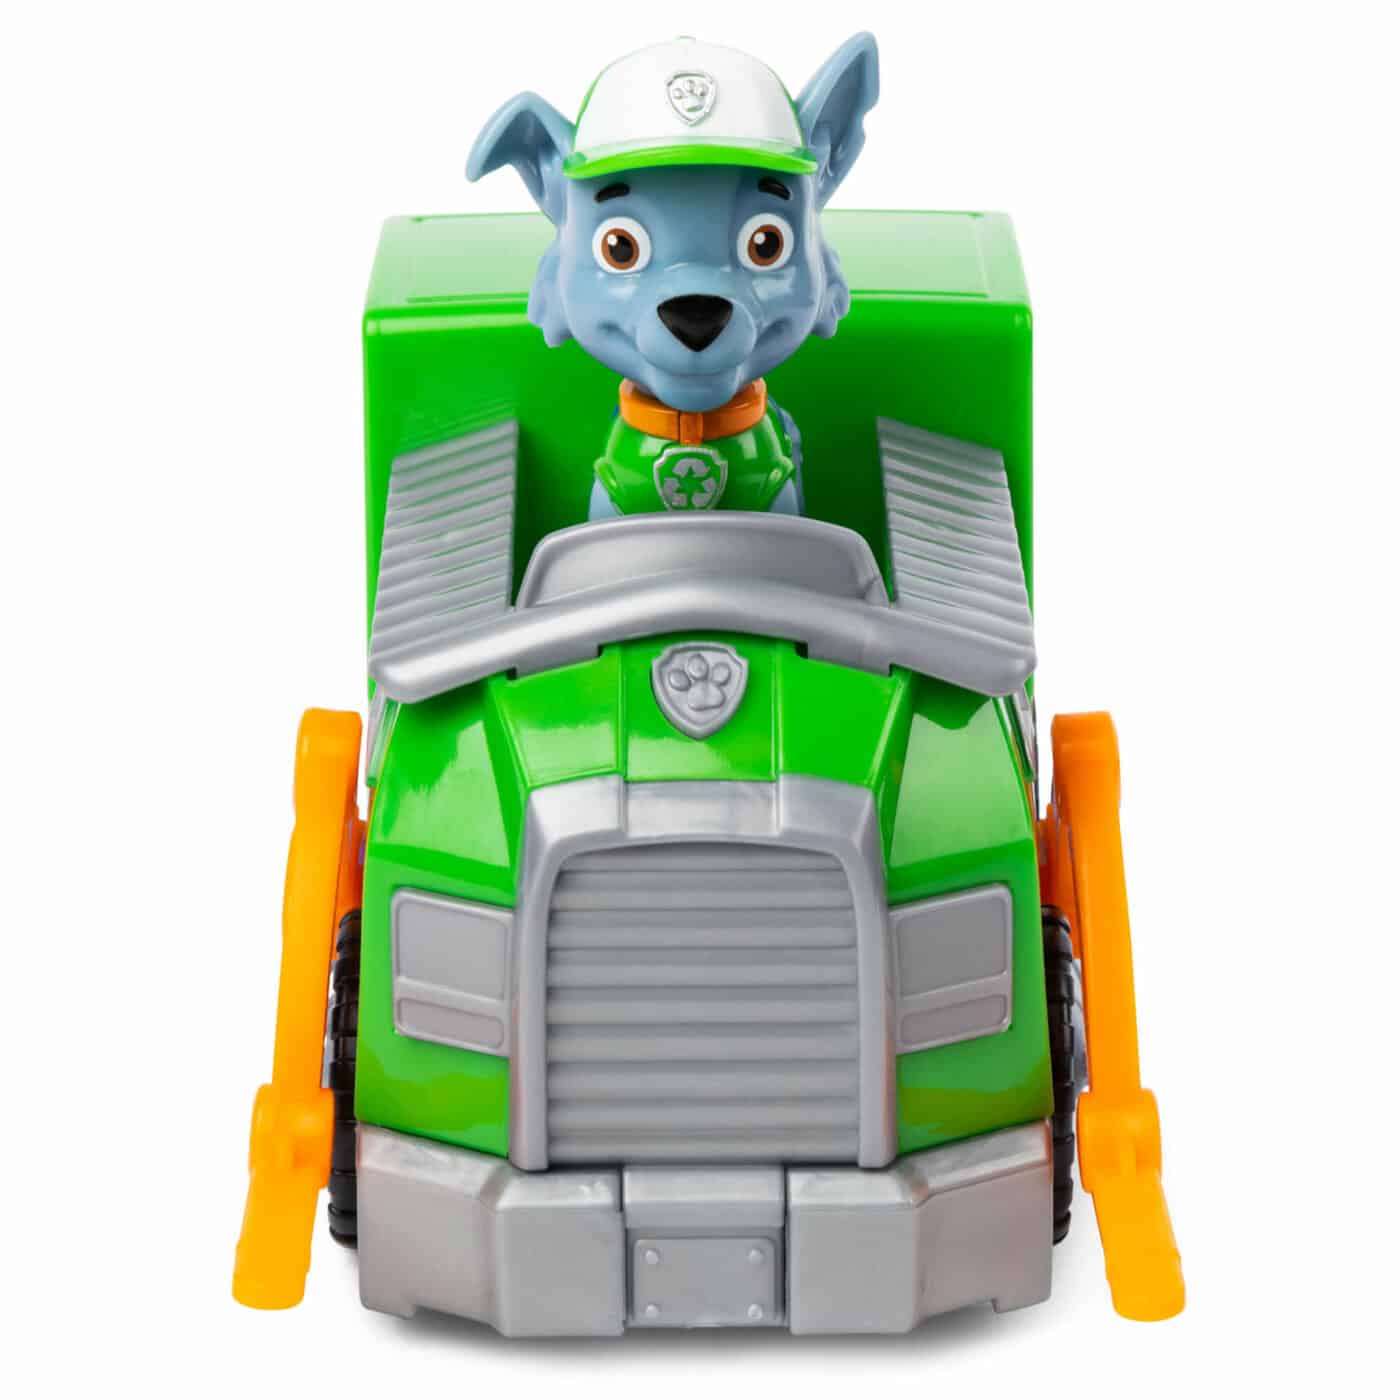 Nickelodeon - Paw Patrol Vehicle - Rocky Recycle Truck2